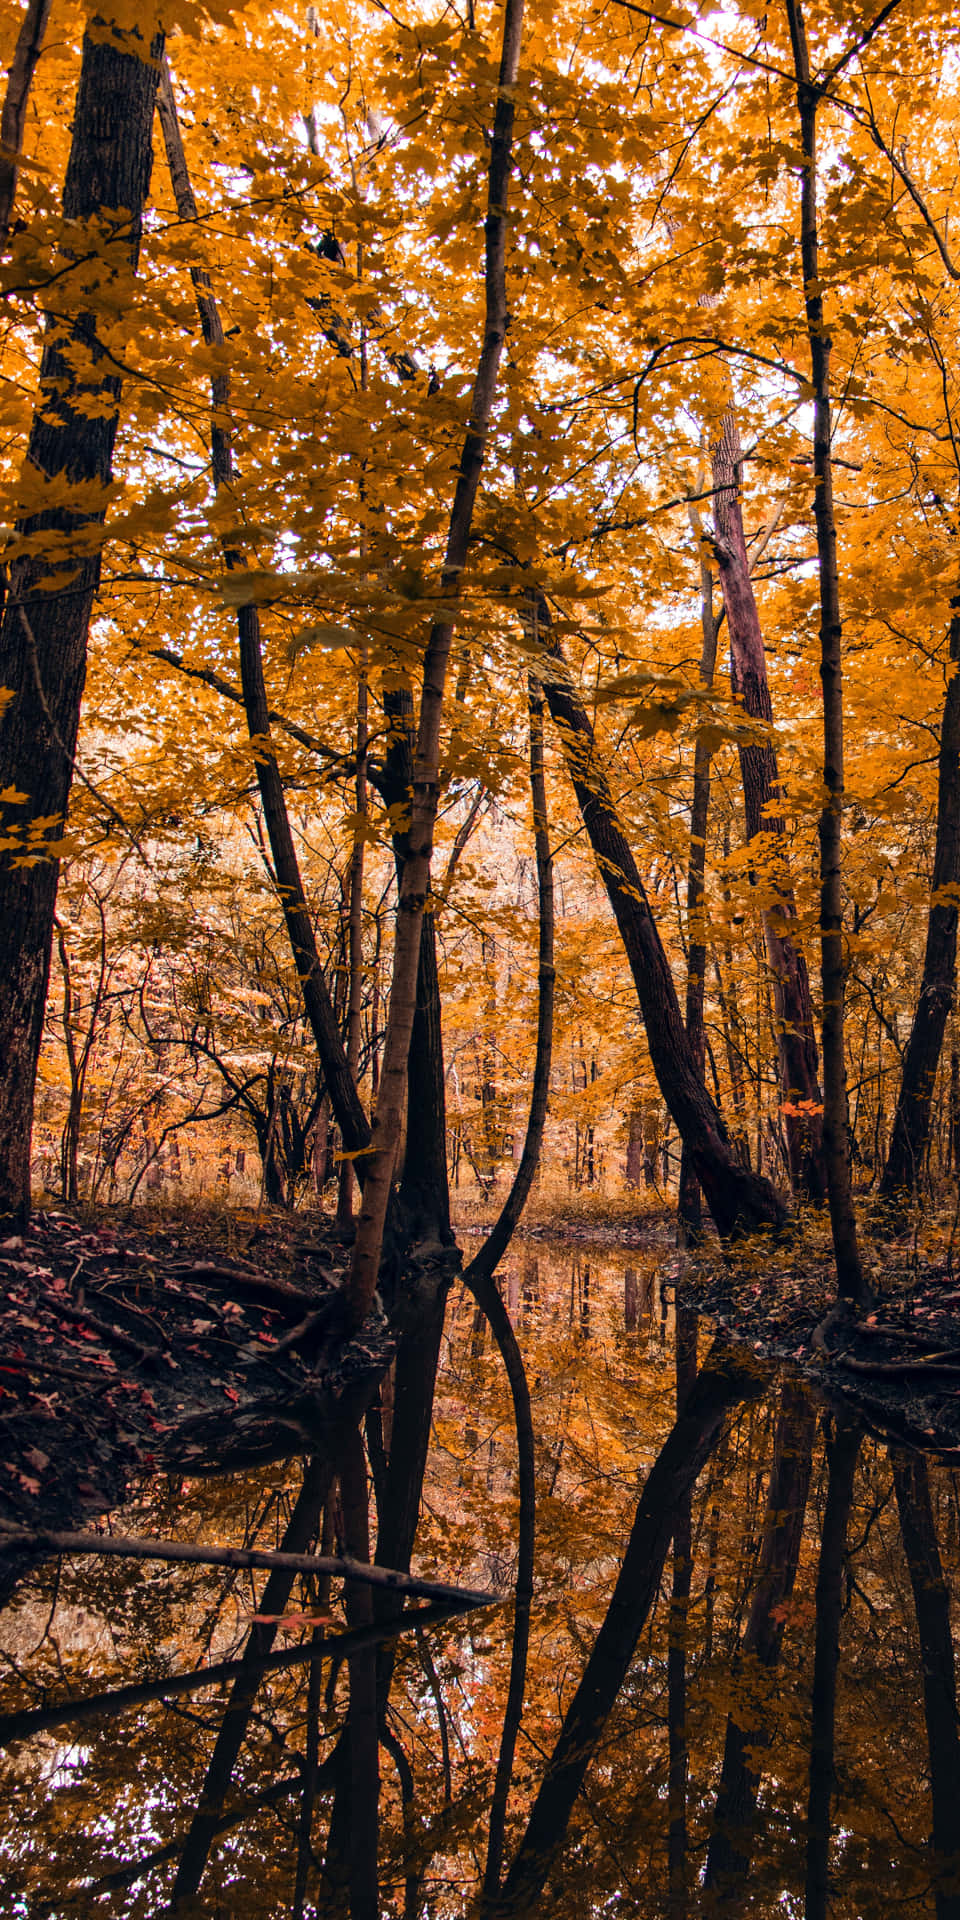 Enjoy the beauty of autumn with the Google Pixel 3